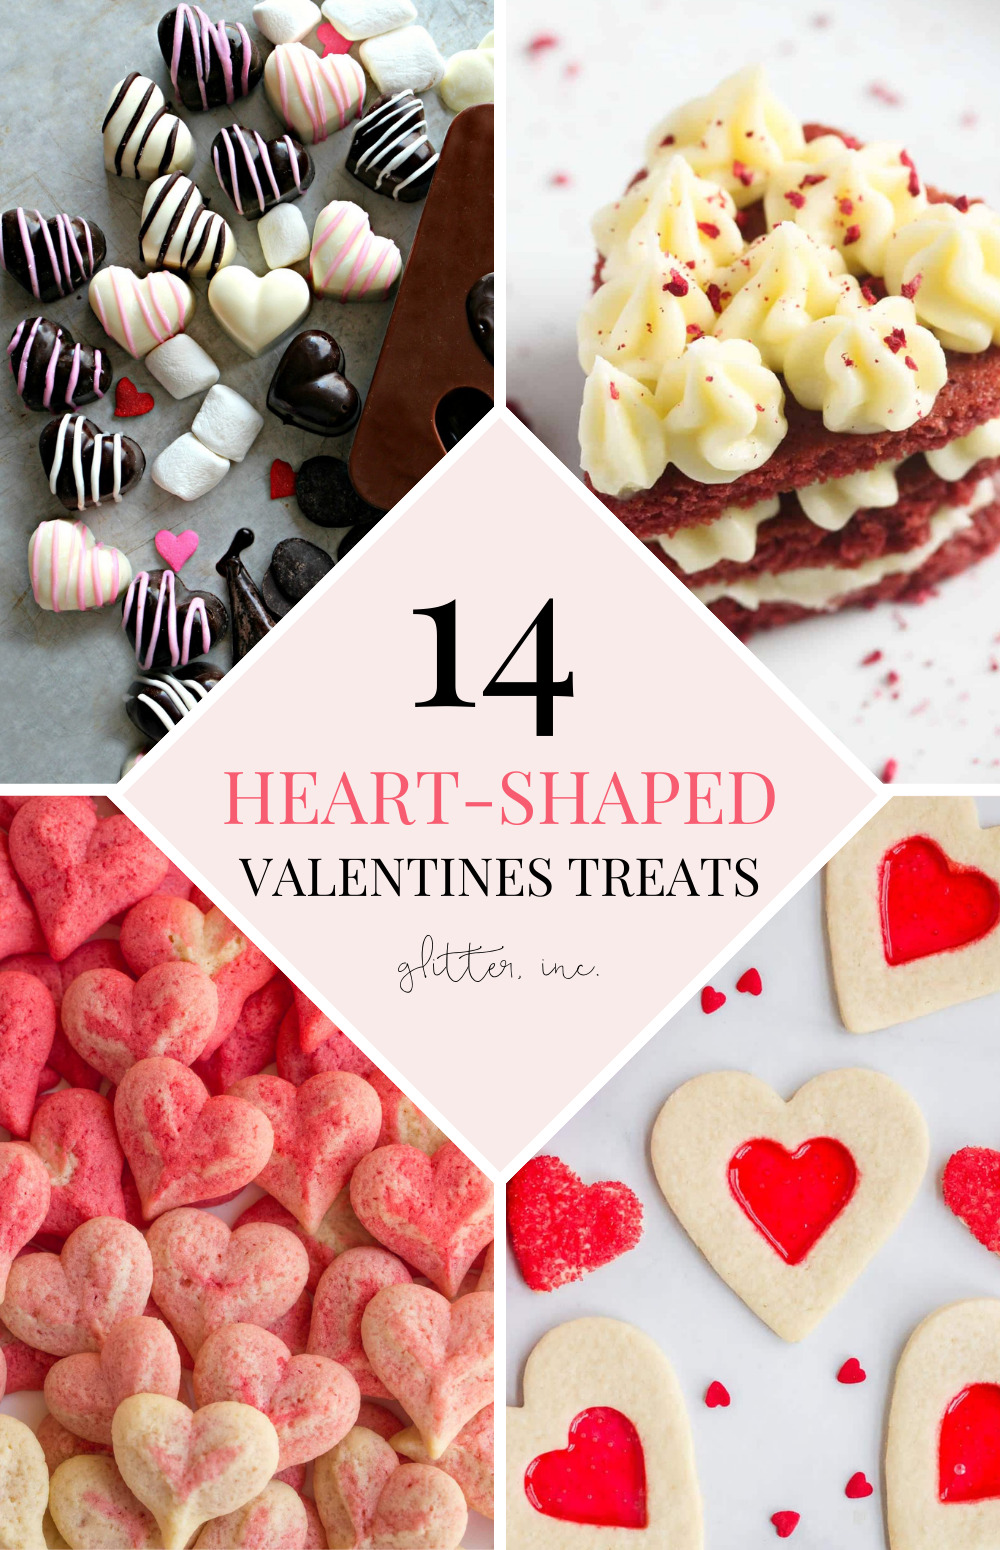 14 Heart-Shaped Valentine’s Day Desserts and Treats - Valentine Dessert Recipes with Hearts